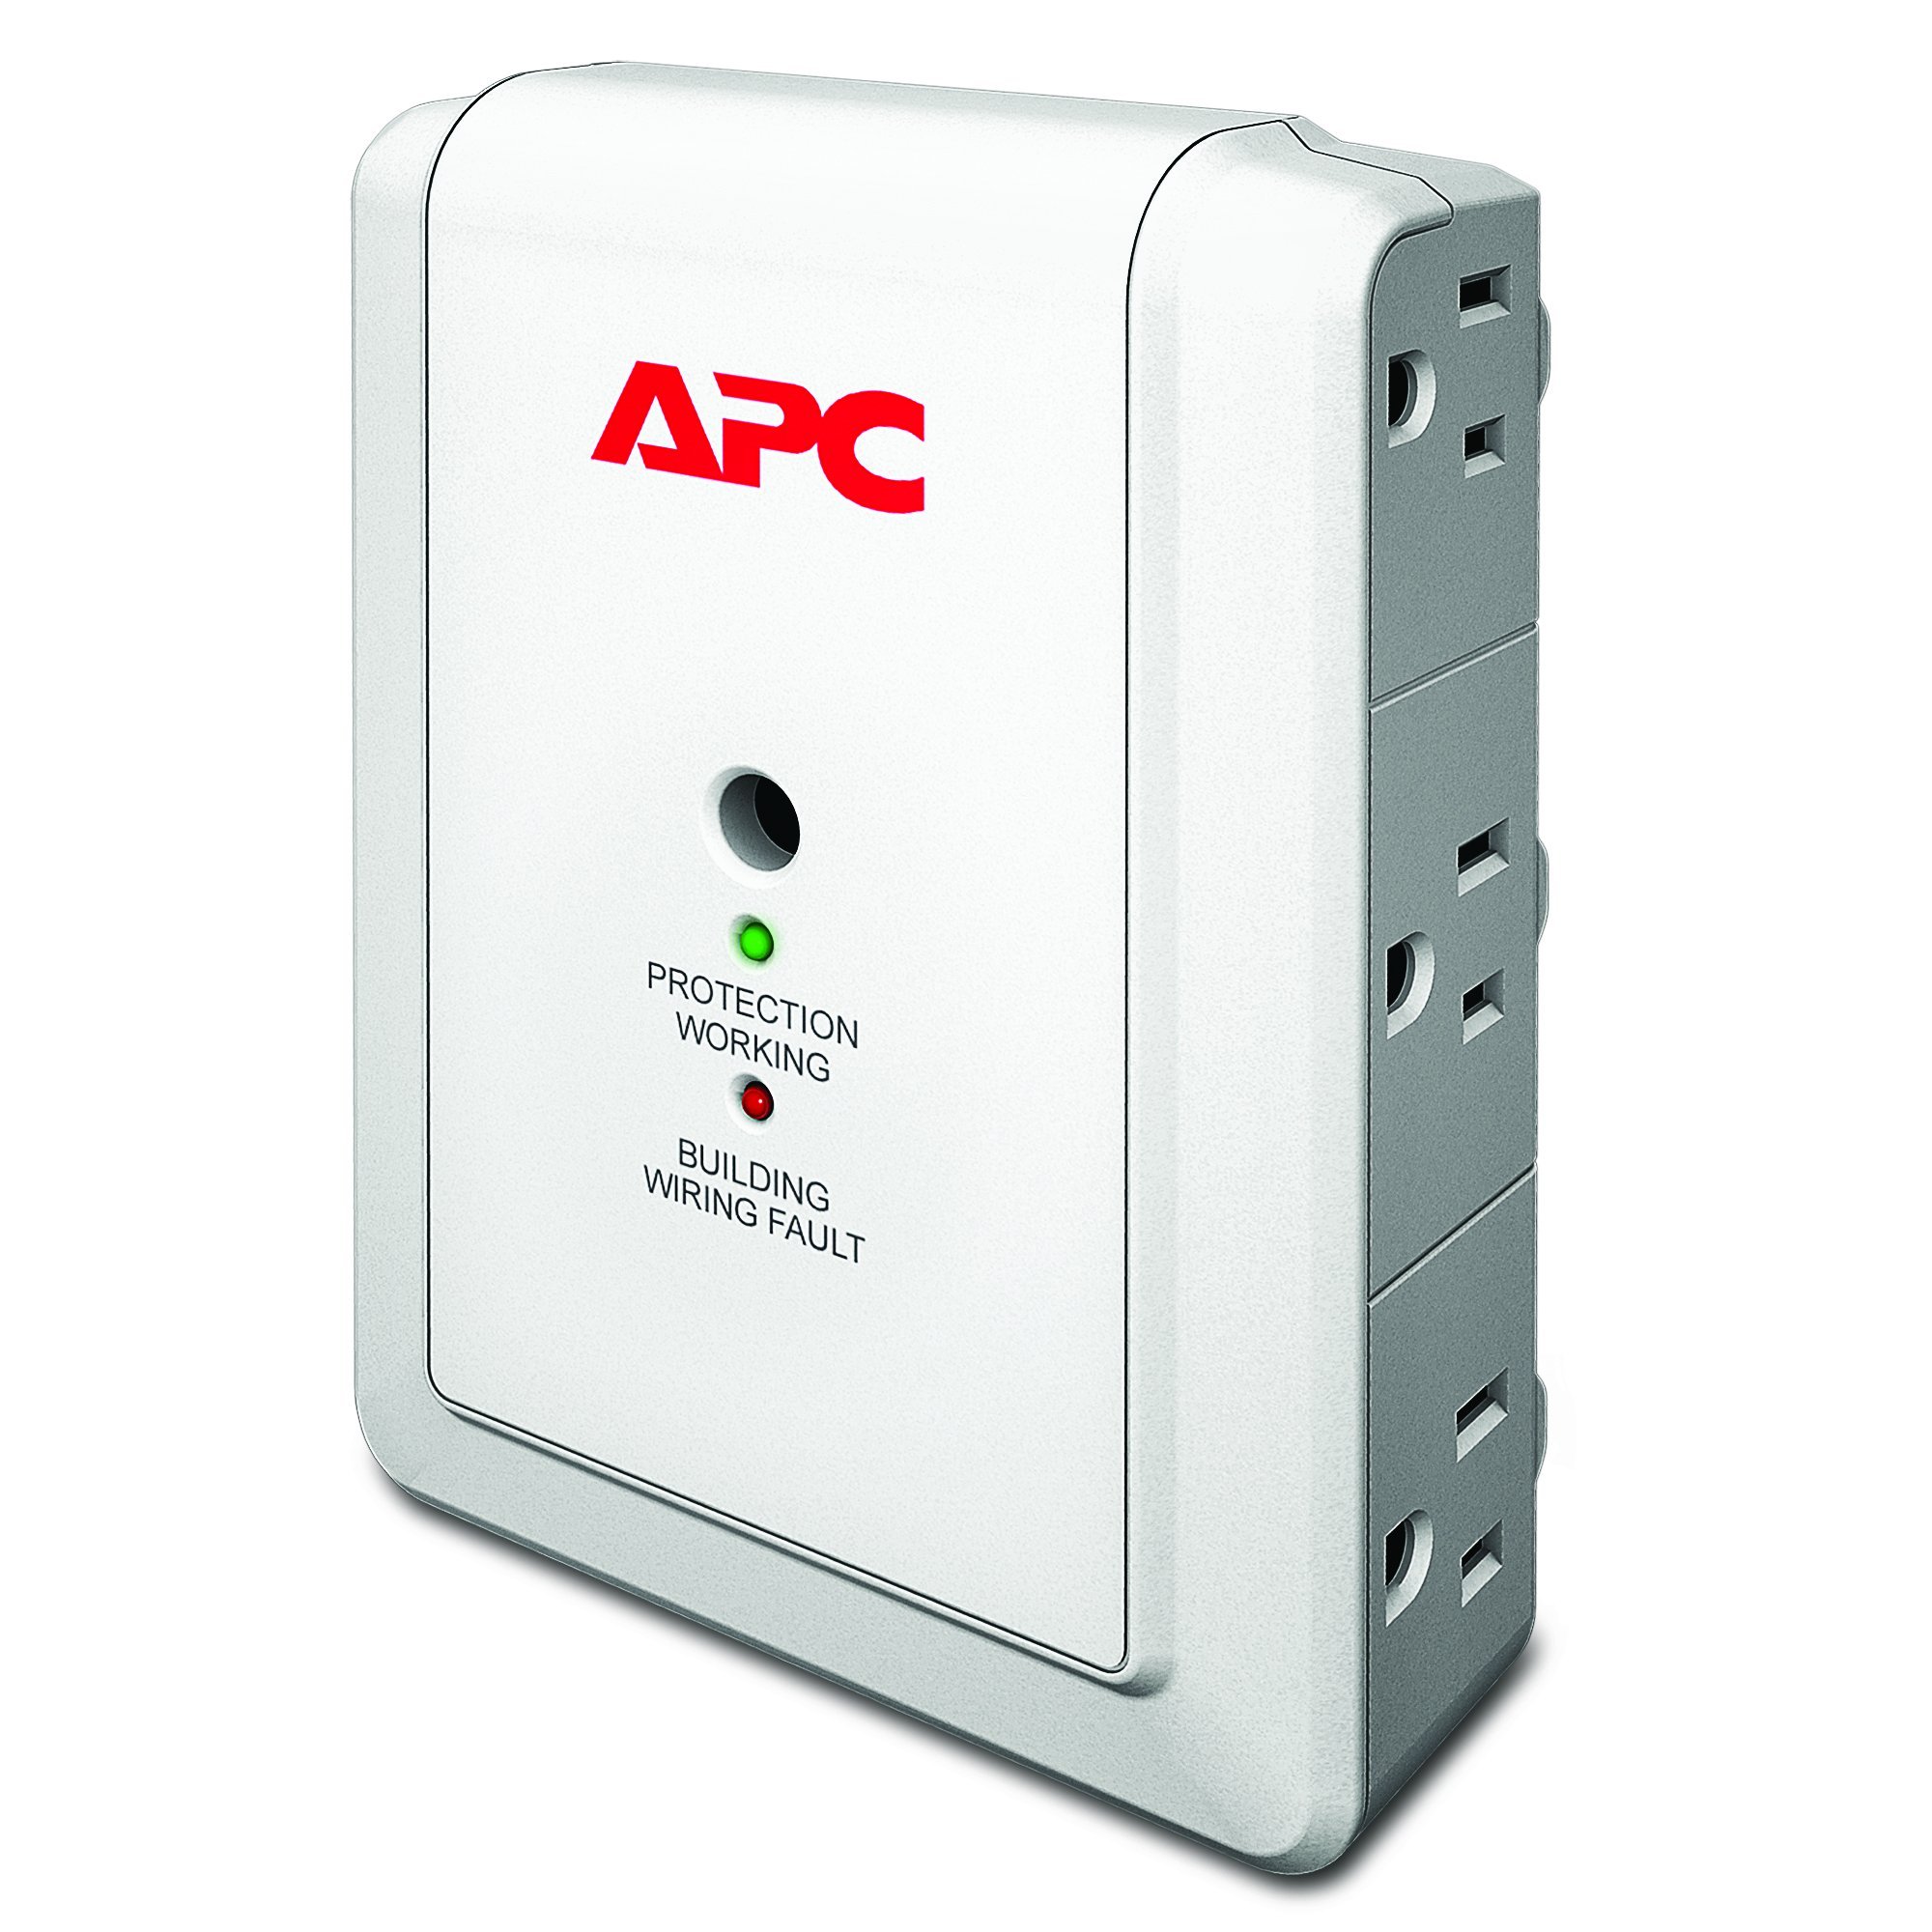 Book Cover APC Wall Outlet Multi Plug Extender, P6WT, (6) AC Multi Plug Outlet, 1080 Joule Surge Protector with Telephone Protection Ports Telephone Port